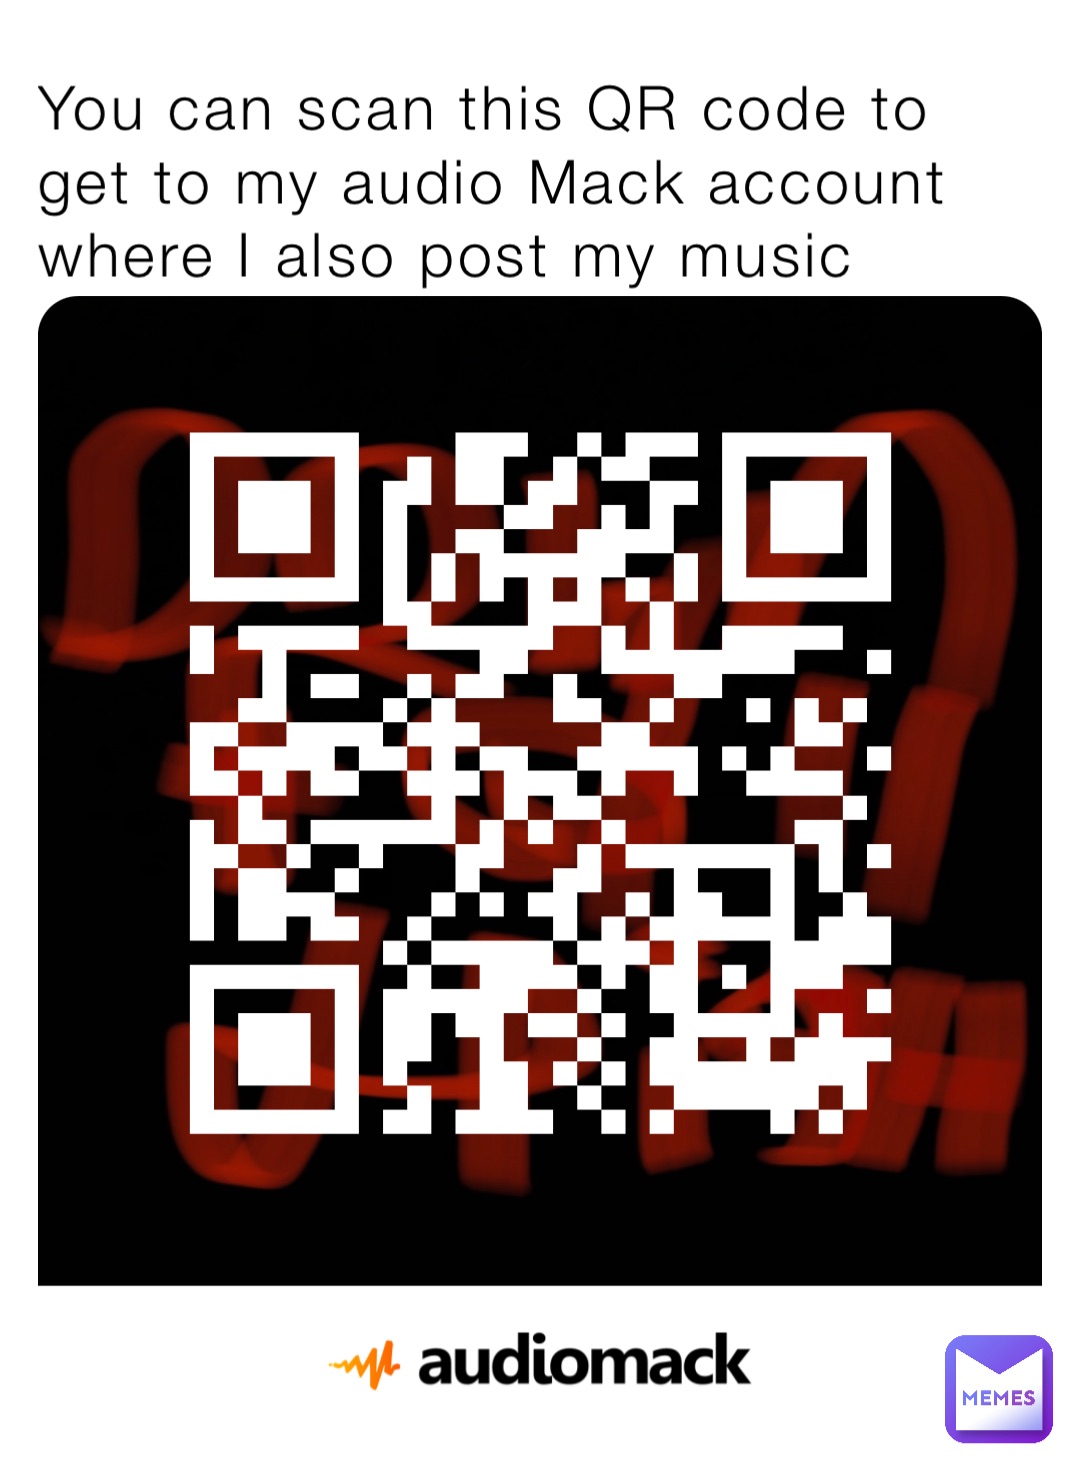 You can scan this QR code to get to my audio Mack account where I also post my music